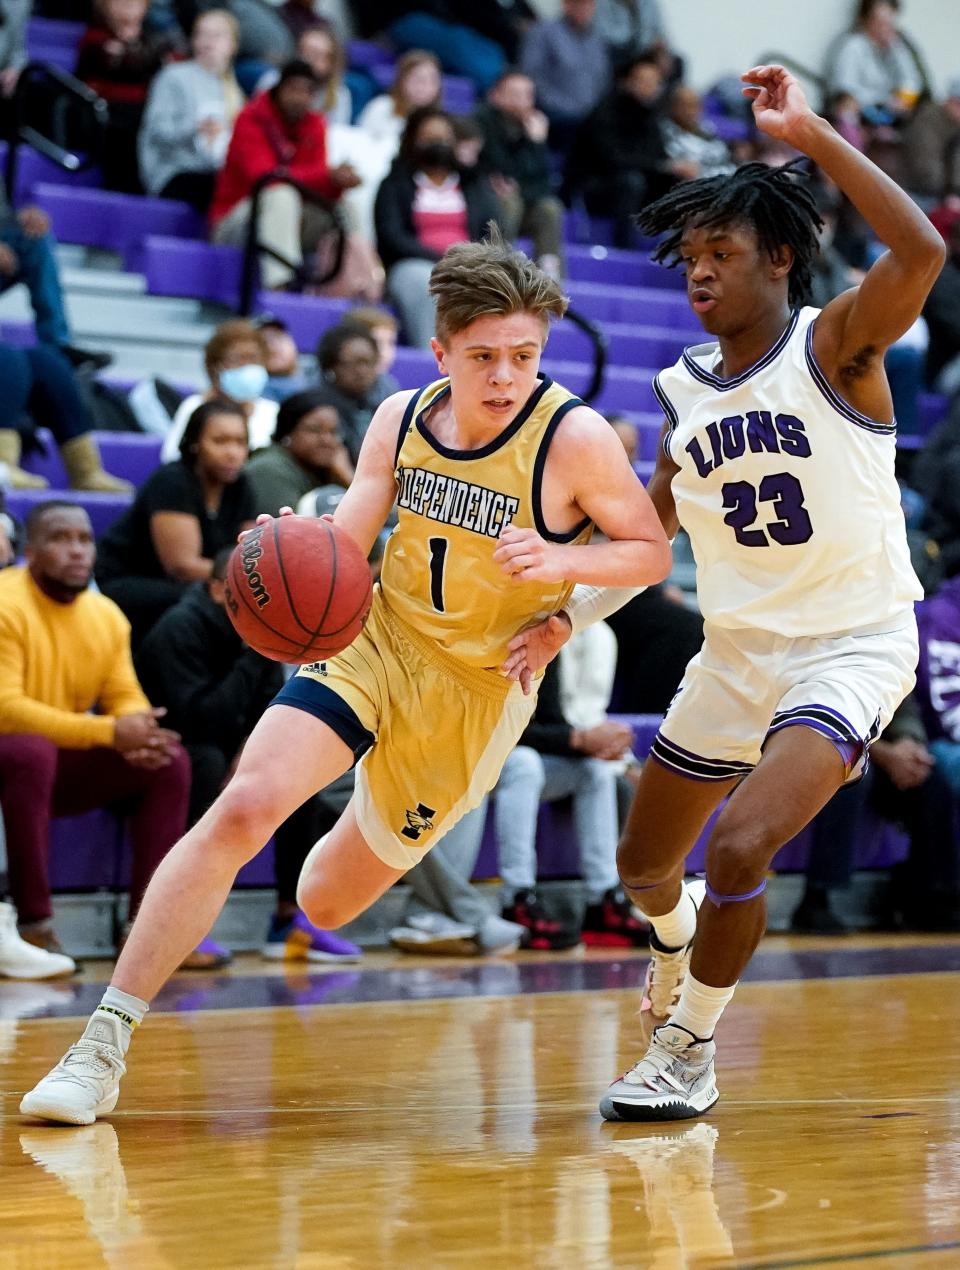 Independence's Jett Montgomery (1) works past Columbia Central's Q Martin (23) during the second quarter at Columbia Central High School in Columbia, Tenn., Wednesday, Jan. 26, 2022.